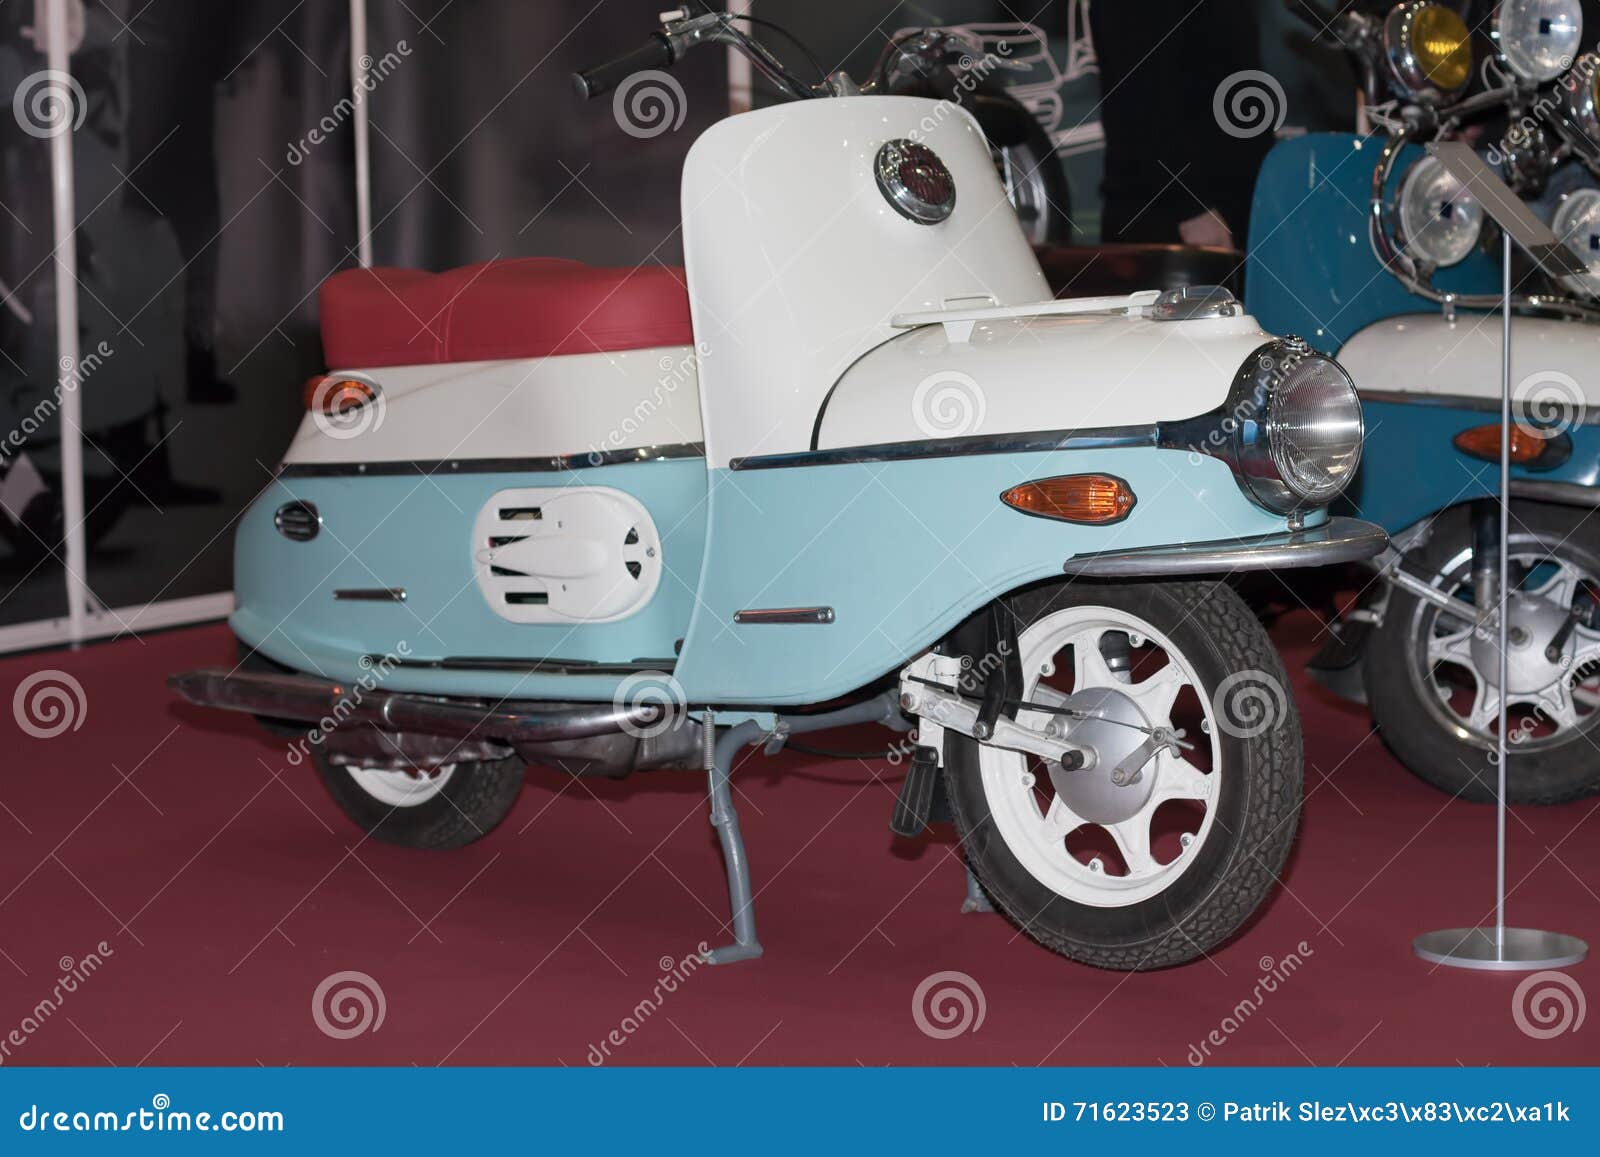 electric scooter , iconic scooter from 60ÃÂ´s is back.